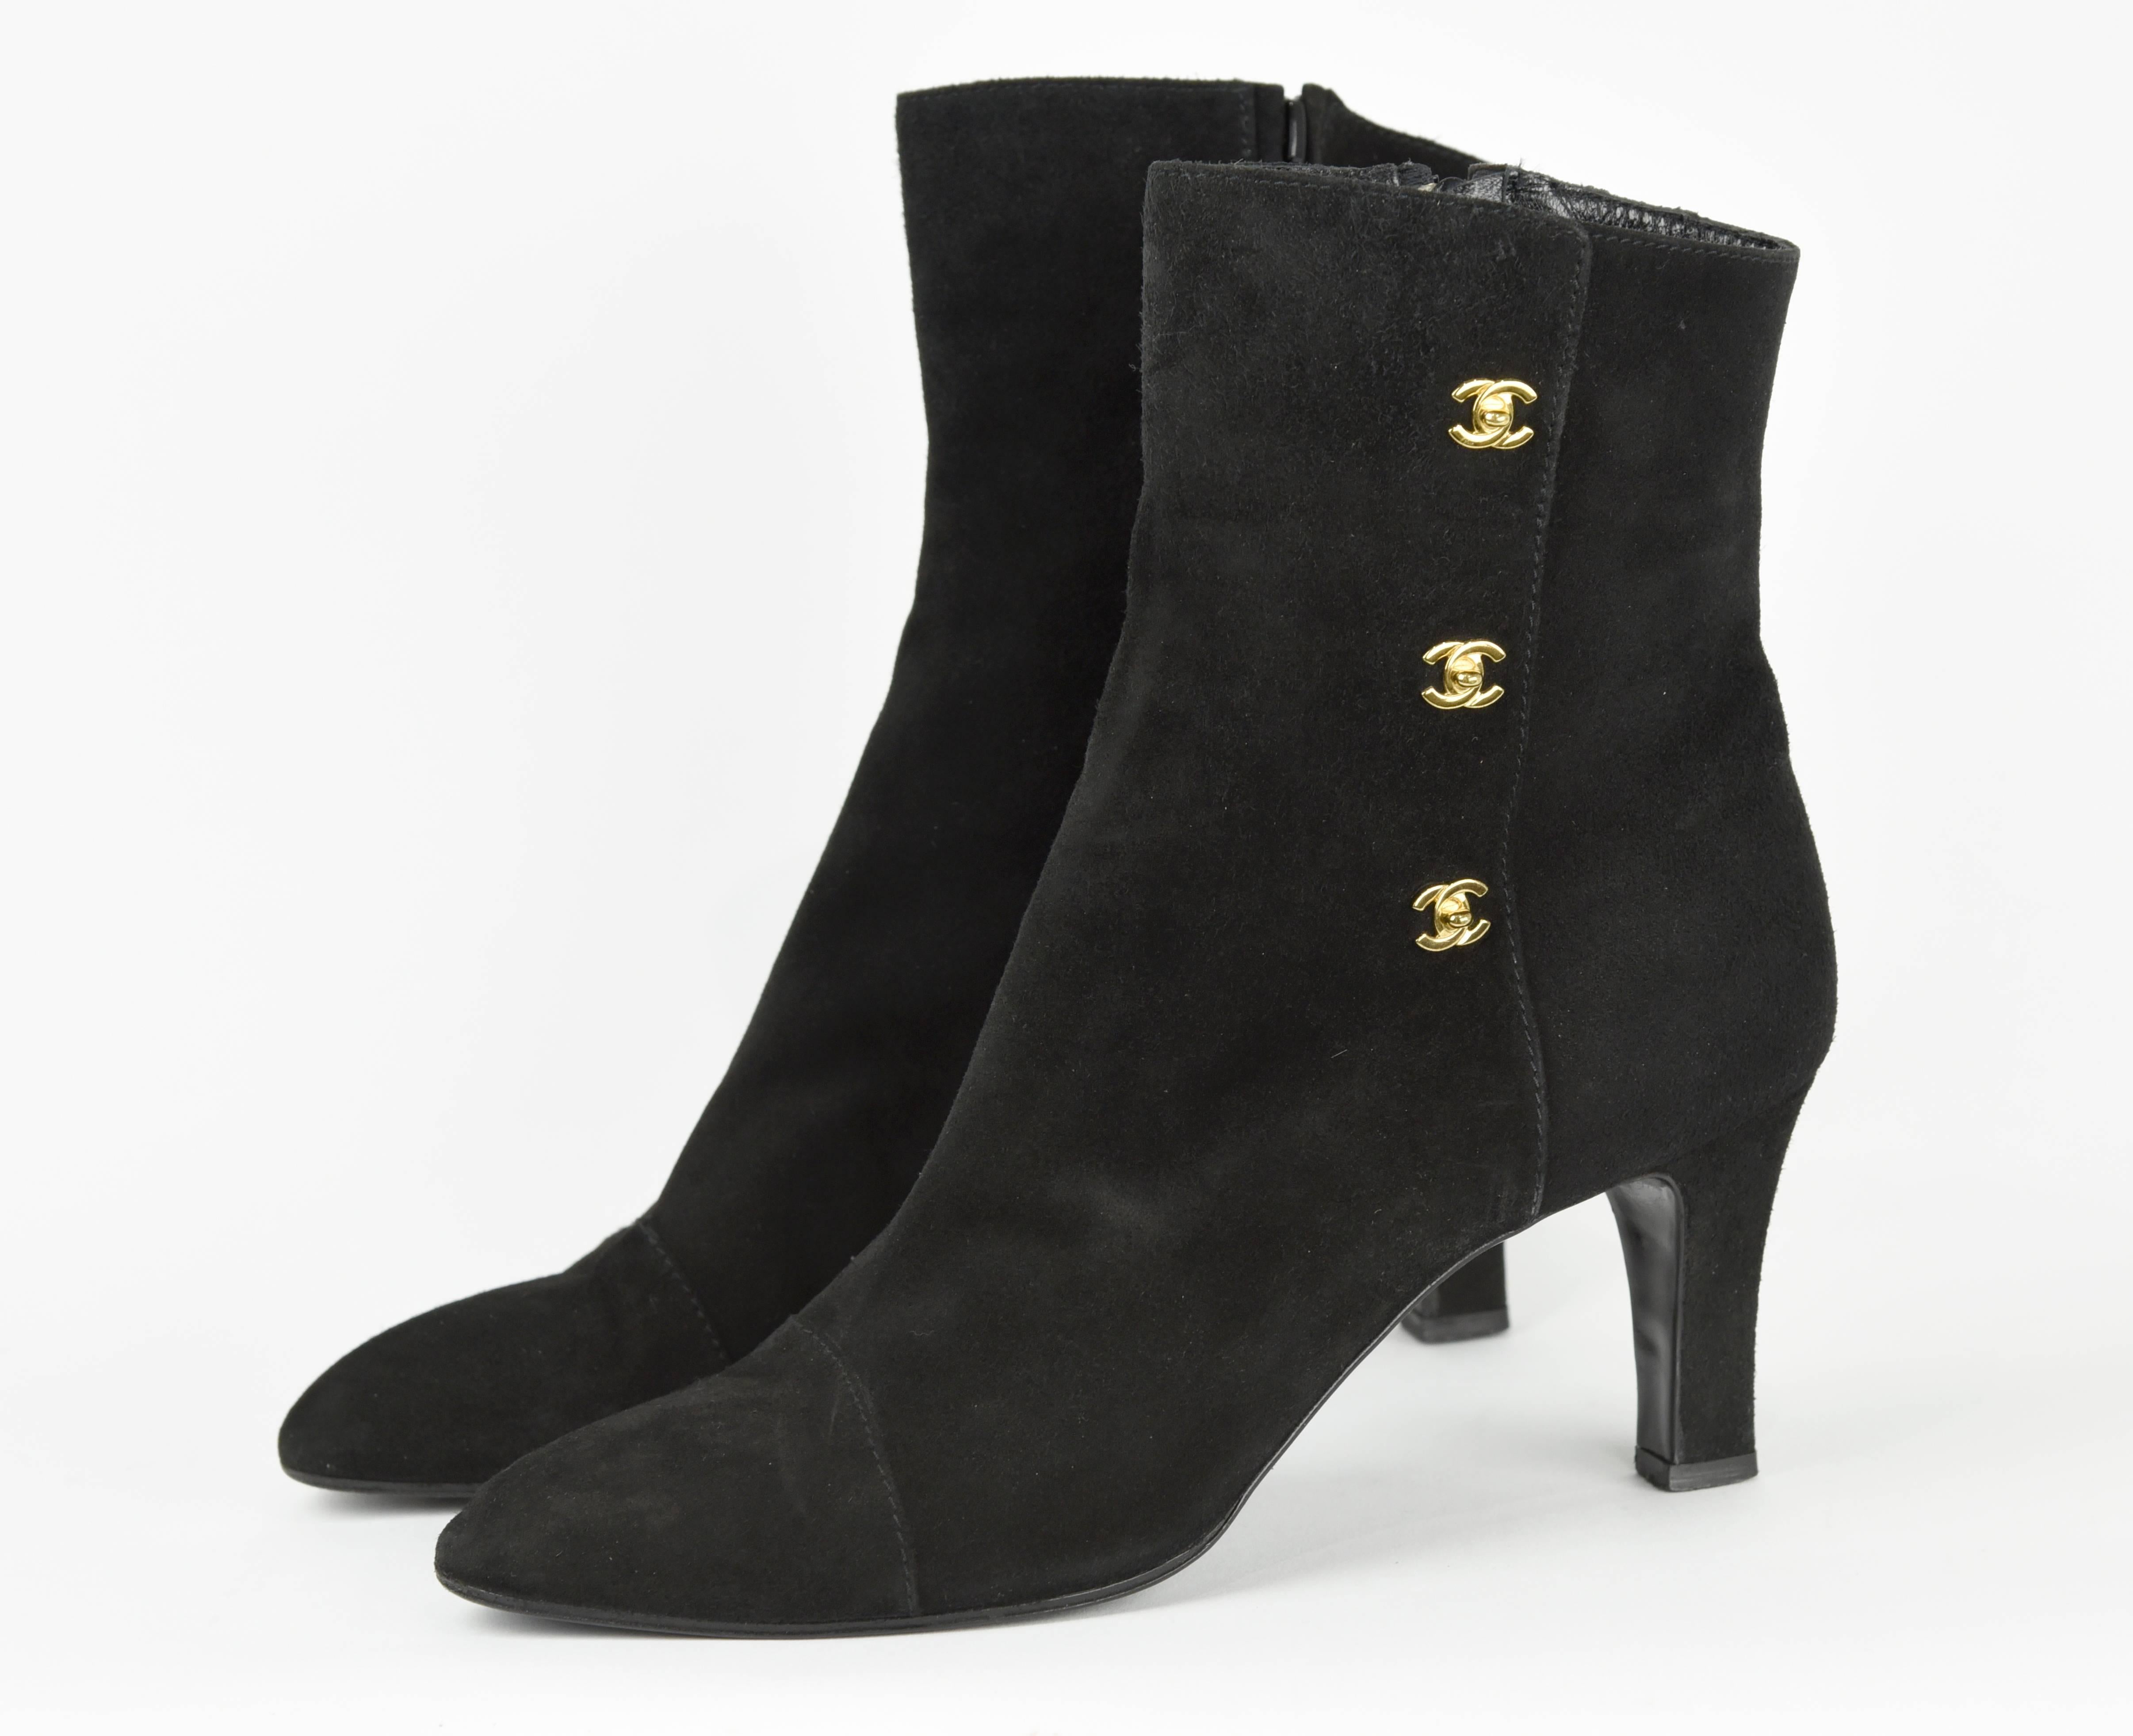 These are Chanel elegant suede ankle boots in unusually beautiful condition.  No signs of wear except slightly on bottom of sole.  They have side zipper and 3" heels